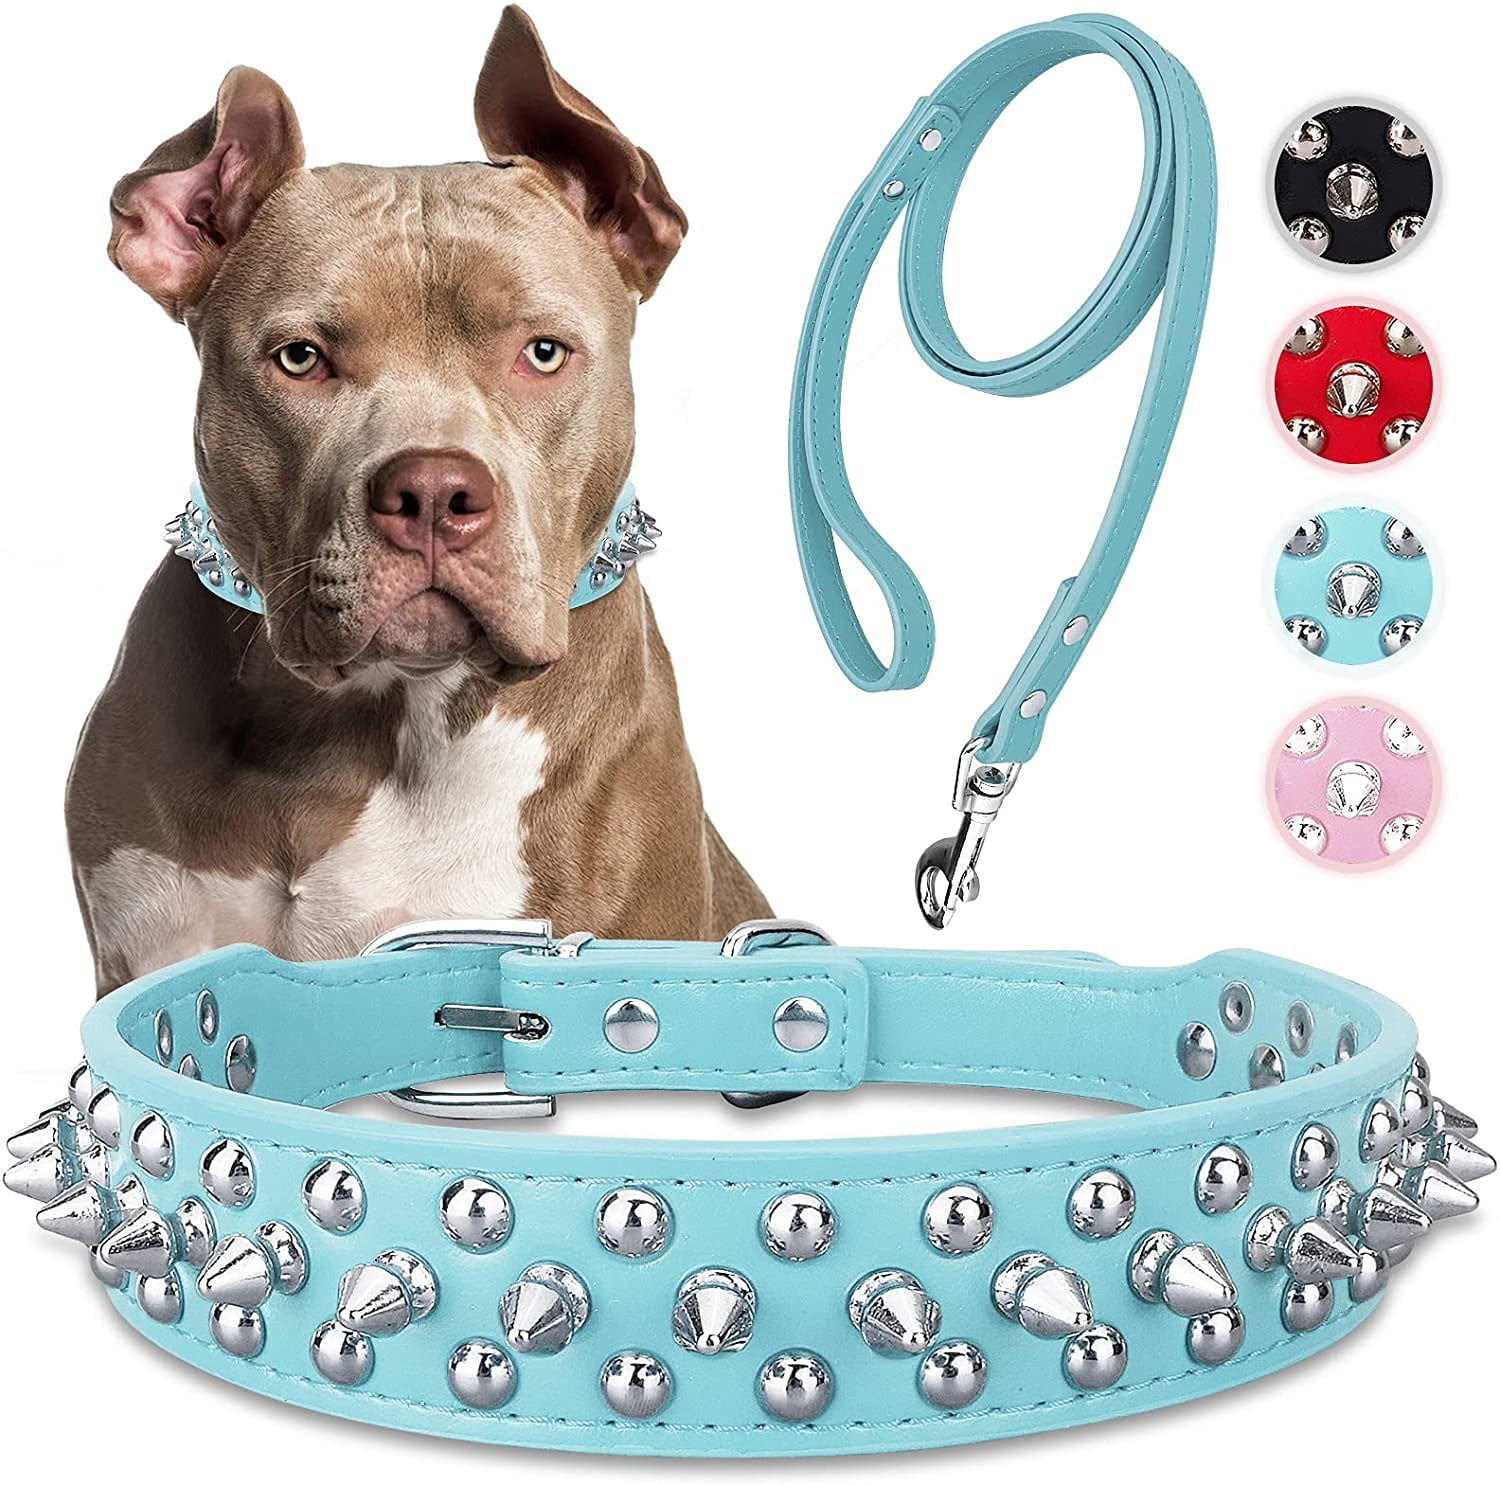 Spiked Studded Leather Dog Collars Pet Collar and Leash Set for Small Medium Dog 